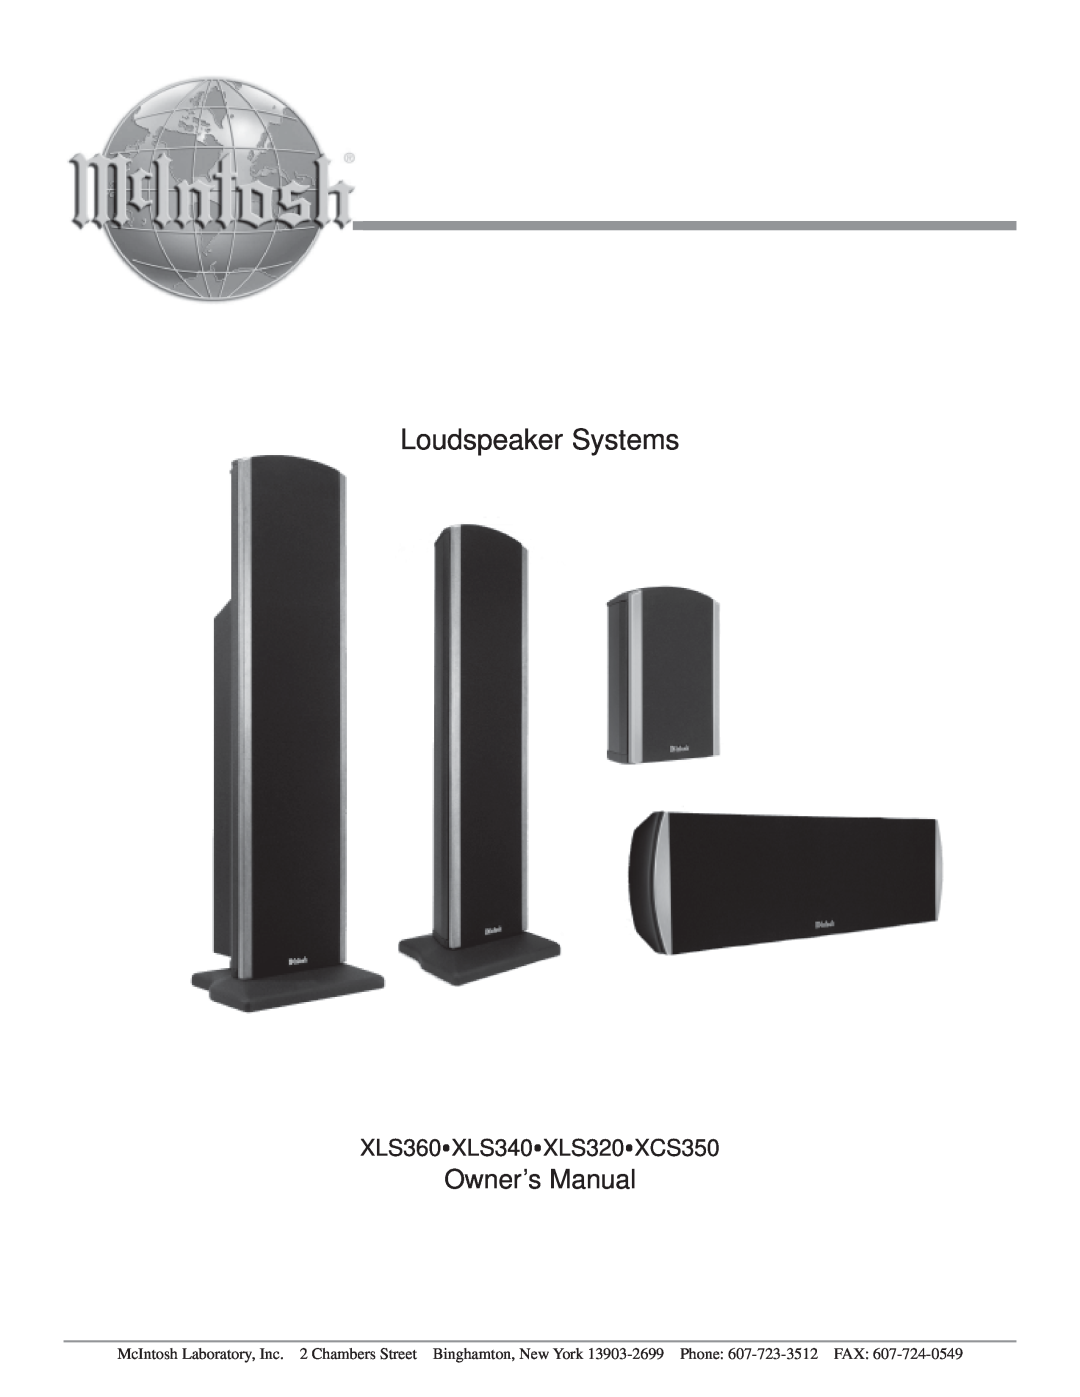 McIntosh owner manual Loudspeaker Systems, Owner’s Manual, XLS360yXLS340yXLS320yXCS350 